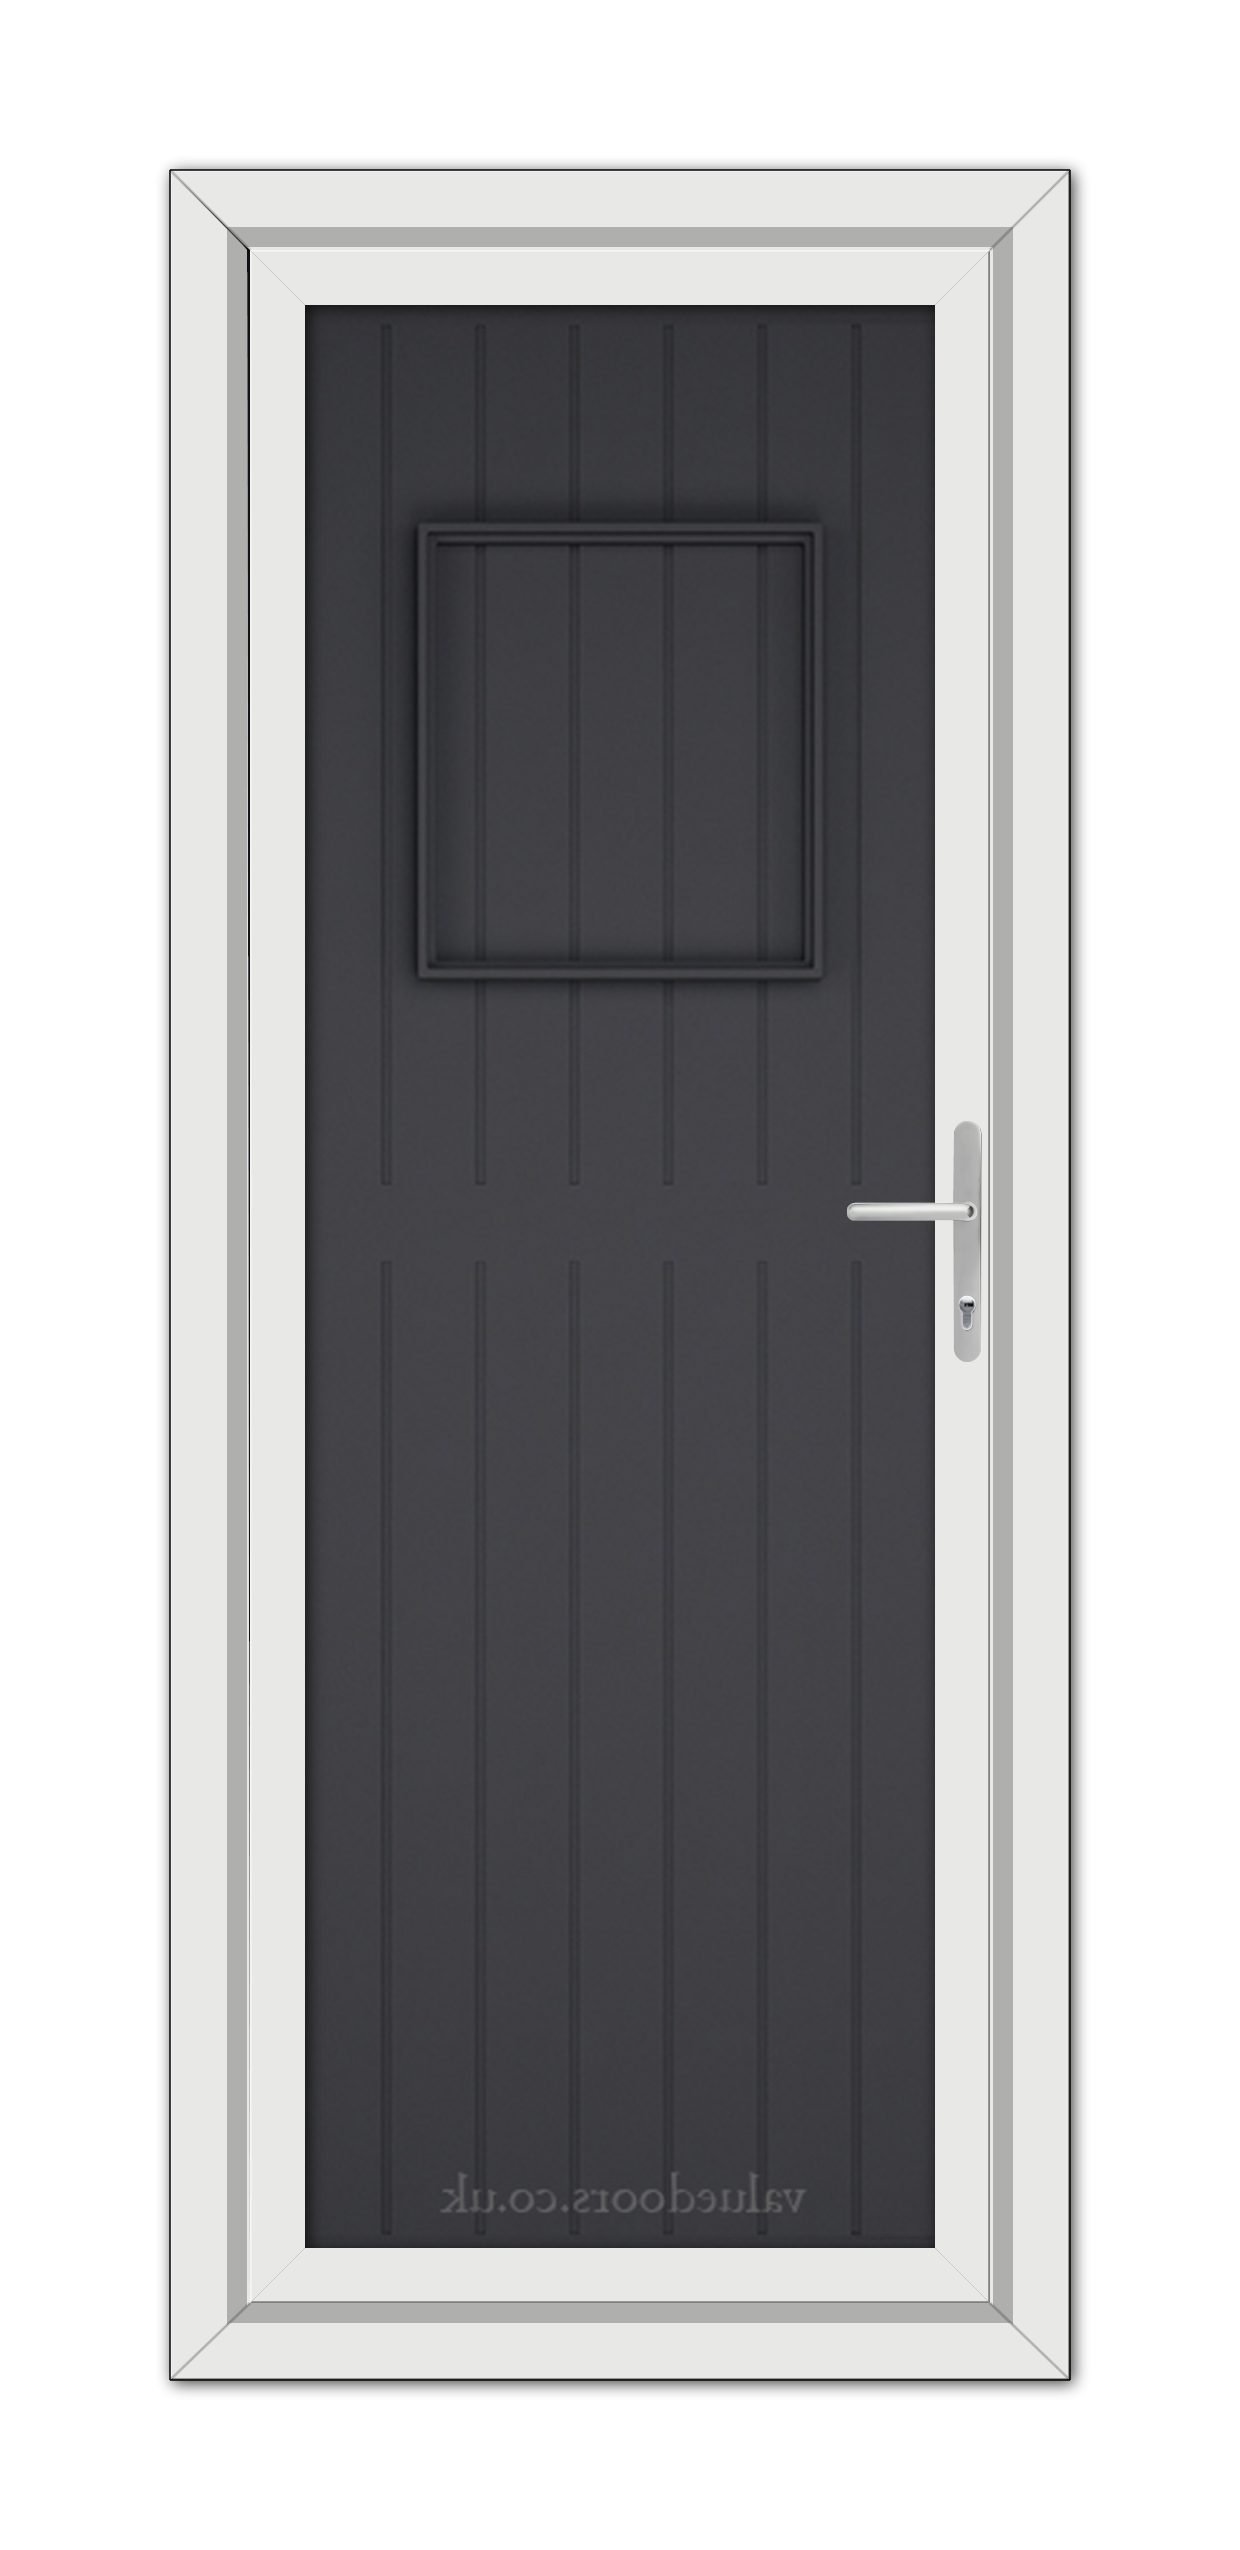 Grey Chatsworth Solid uPVC Door with vertical panels and a small square window, framed in white, with a silver handle on the right side.